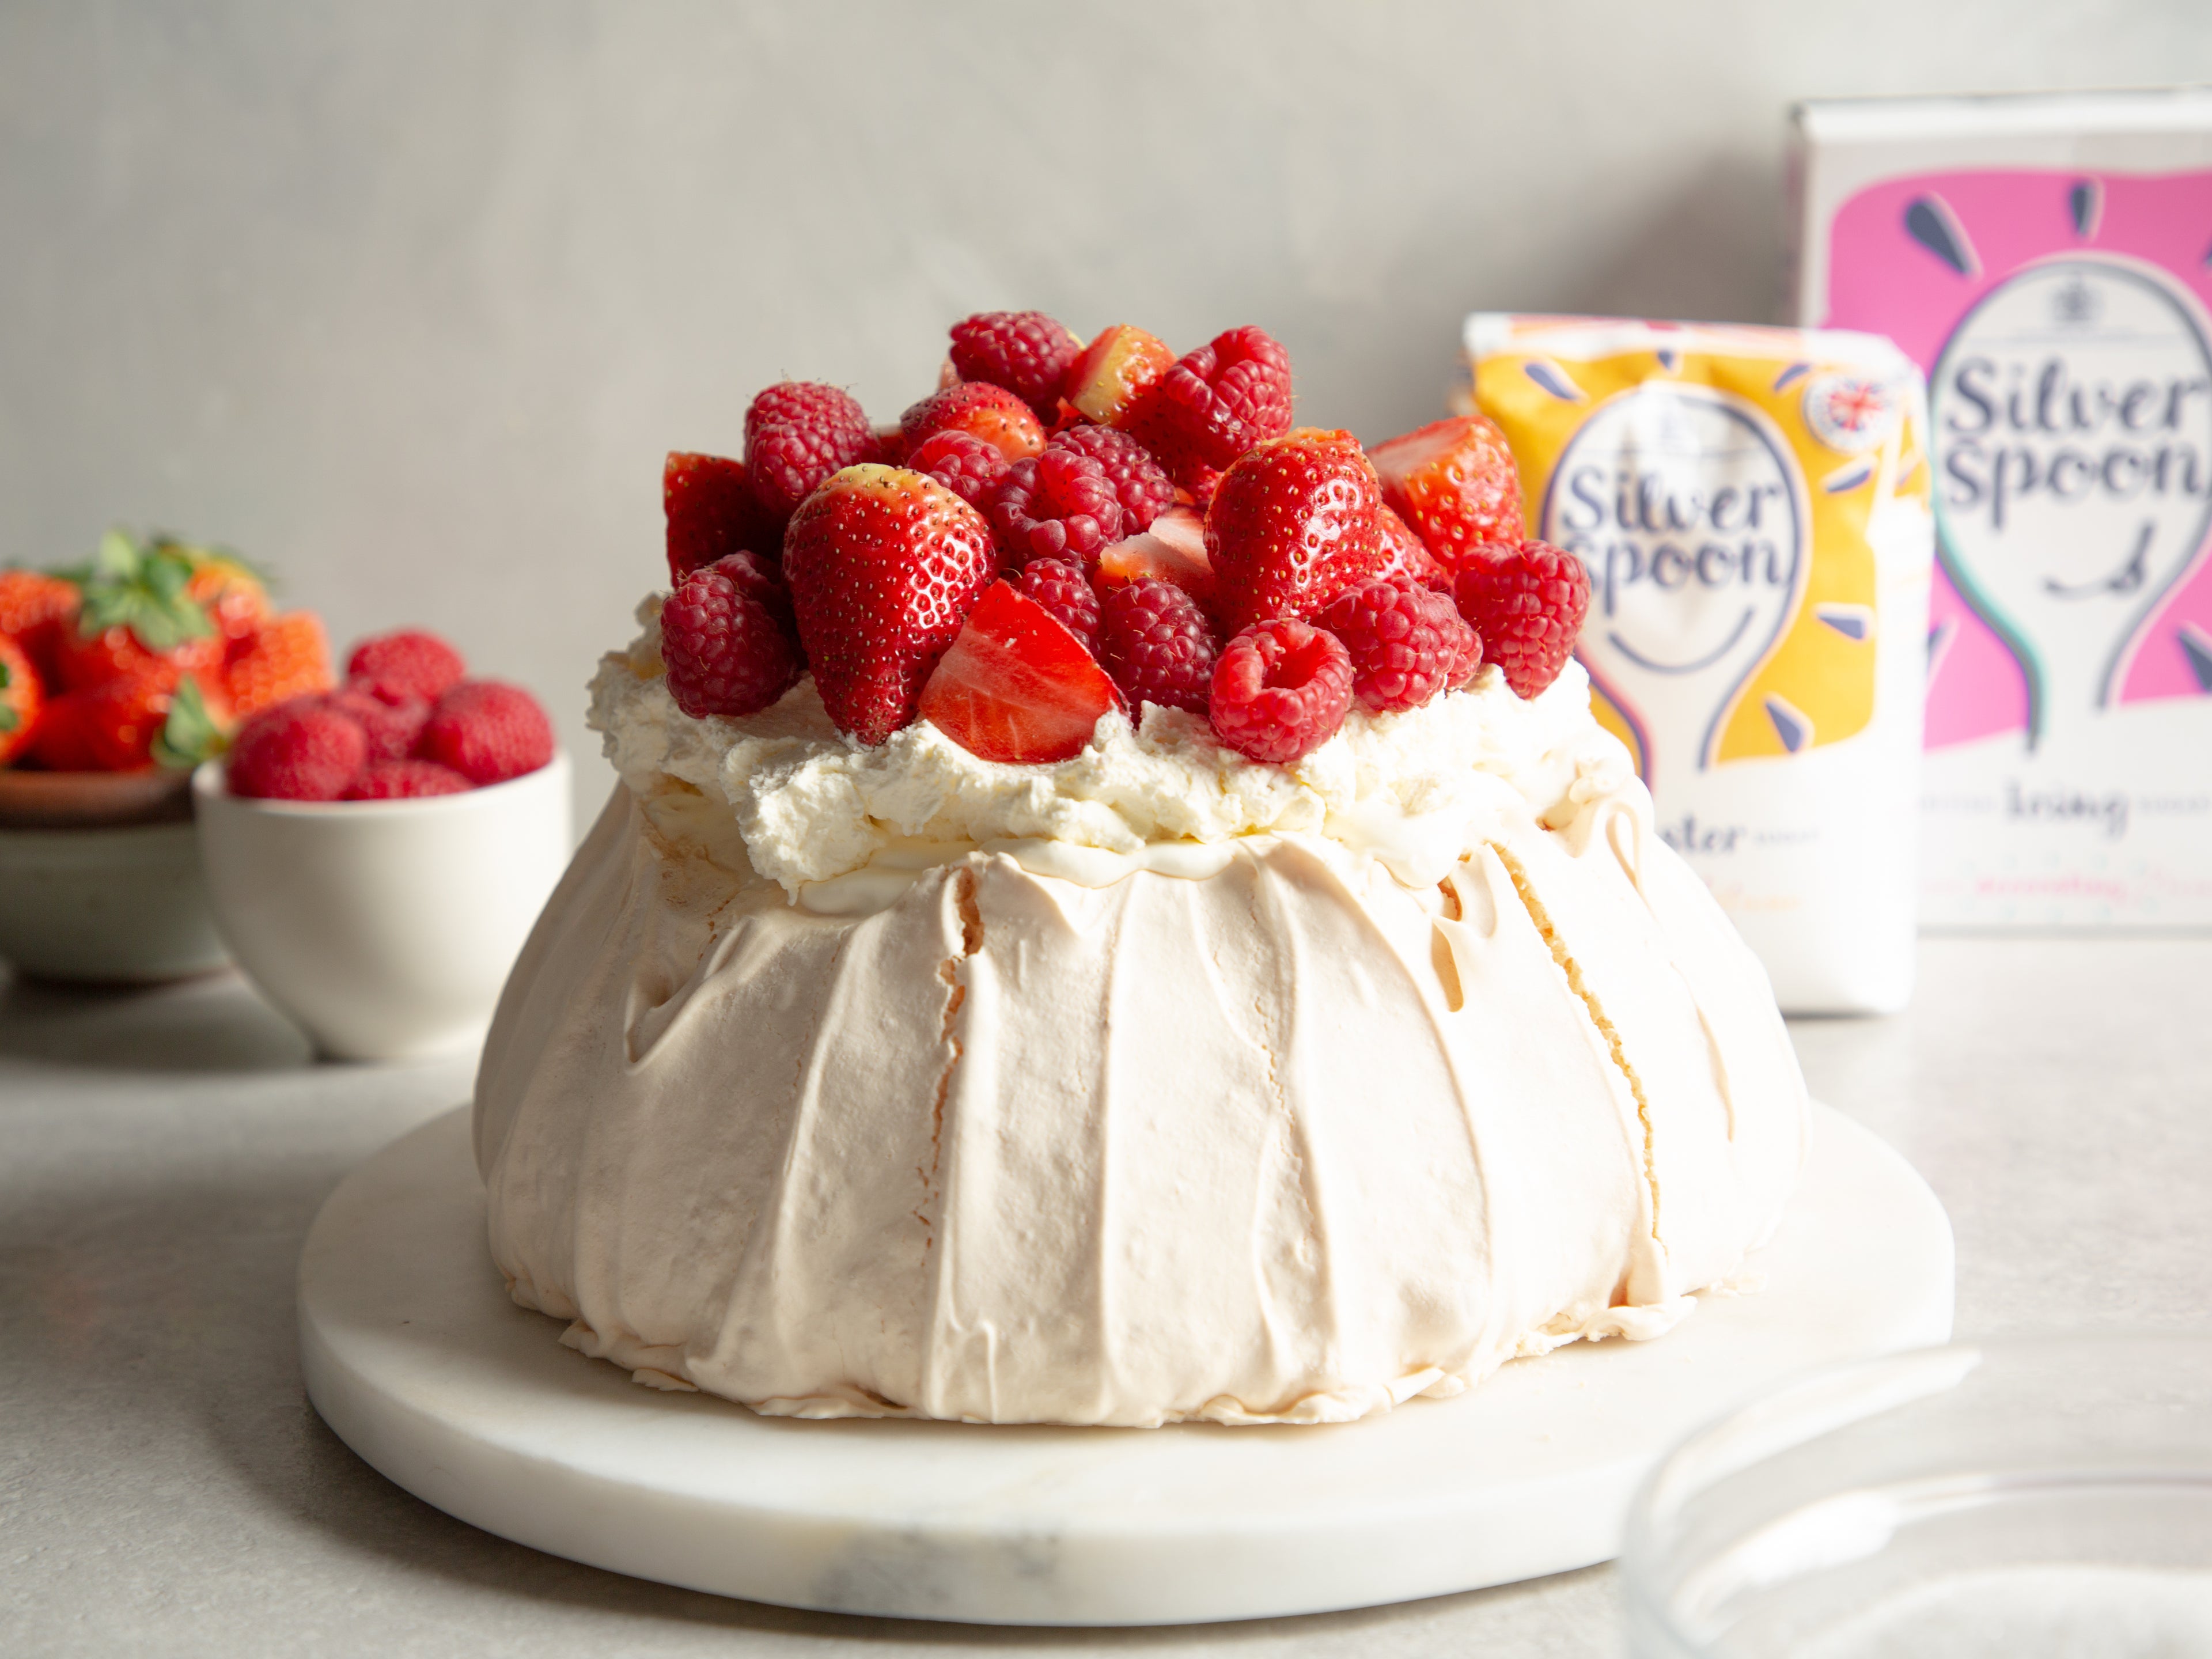 Close up of Strawberry Pavlova topped with fresh summer berries, with a box of Silver Spoon Caster and Icing sugar in the background